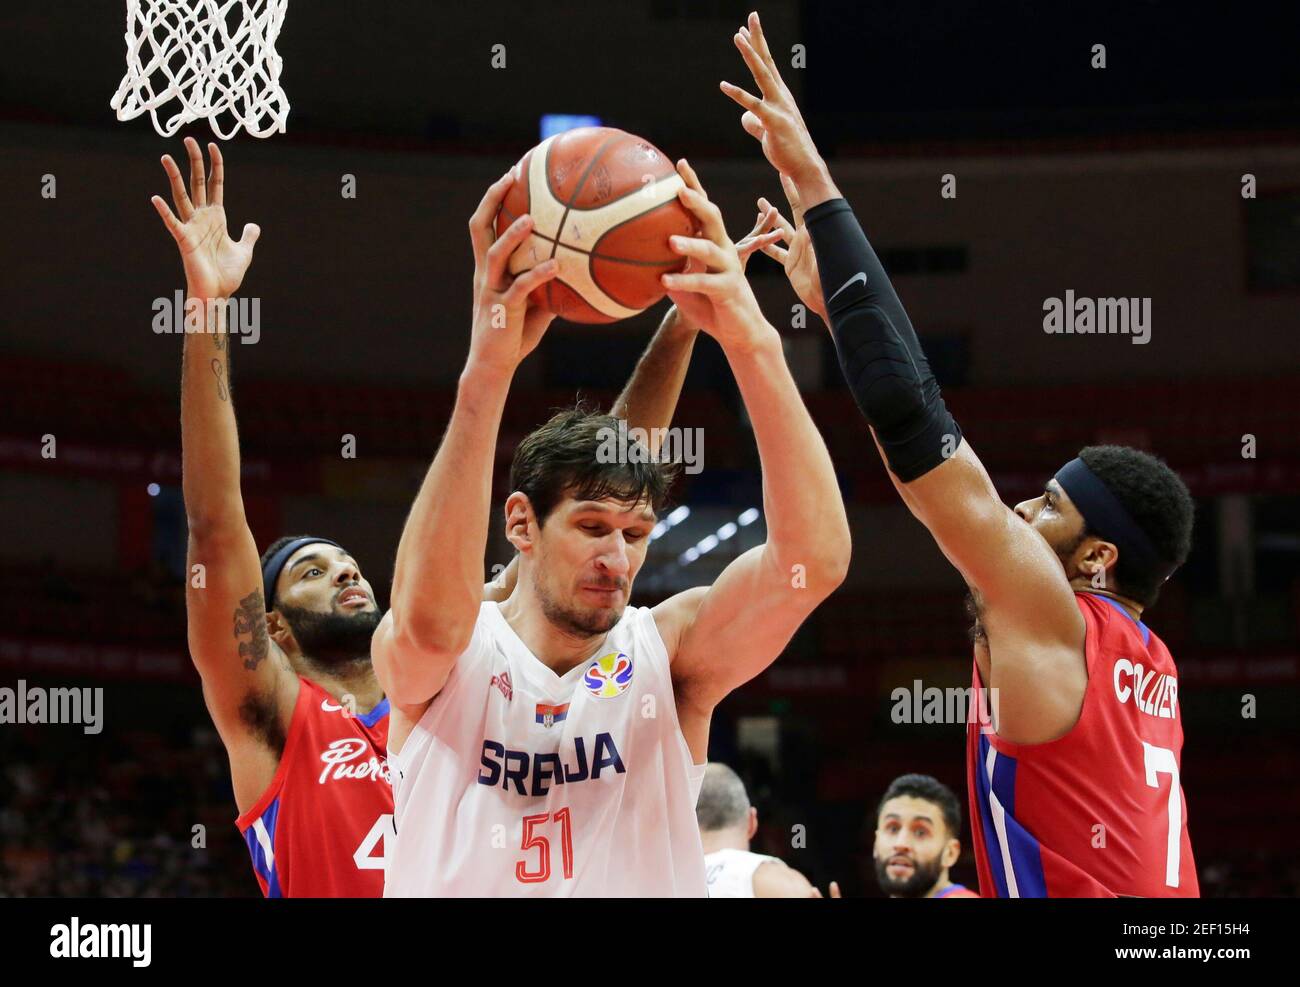 Basketball - FIBA World Cup - Second Round - Group J - Serbia v Puerto Rico - Wuhan Sports Centre, Wuhan, China - September 6, 2019  Serbia's Boban Marjanovic in action with Puerto Rico's Devon Collier REUTERS/Jason Lee Stock Photo